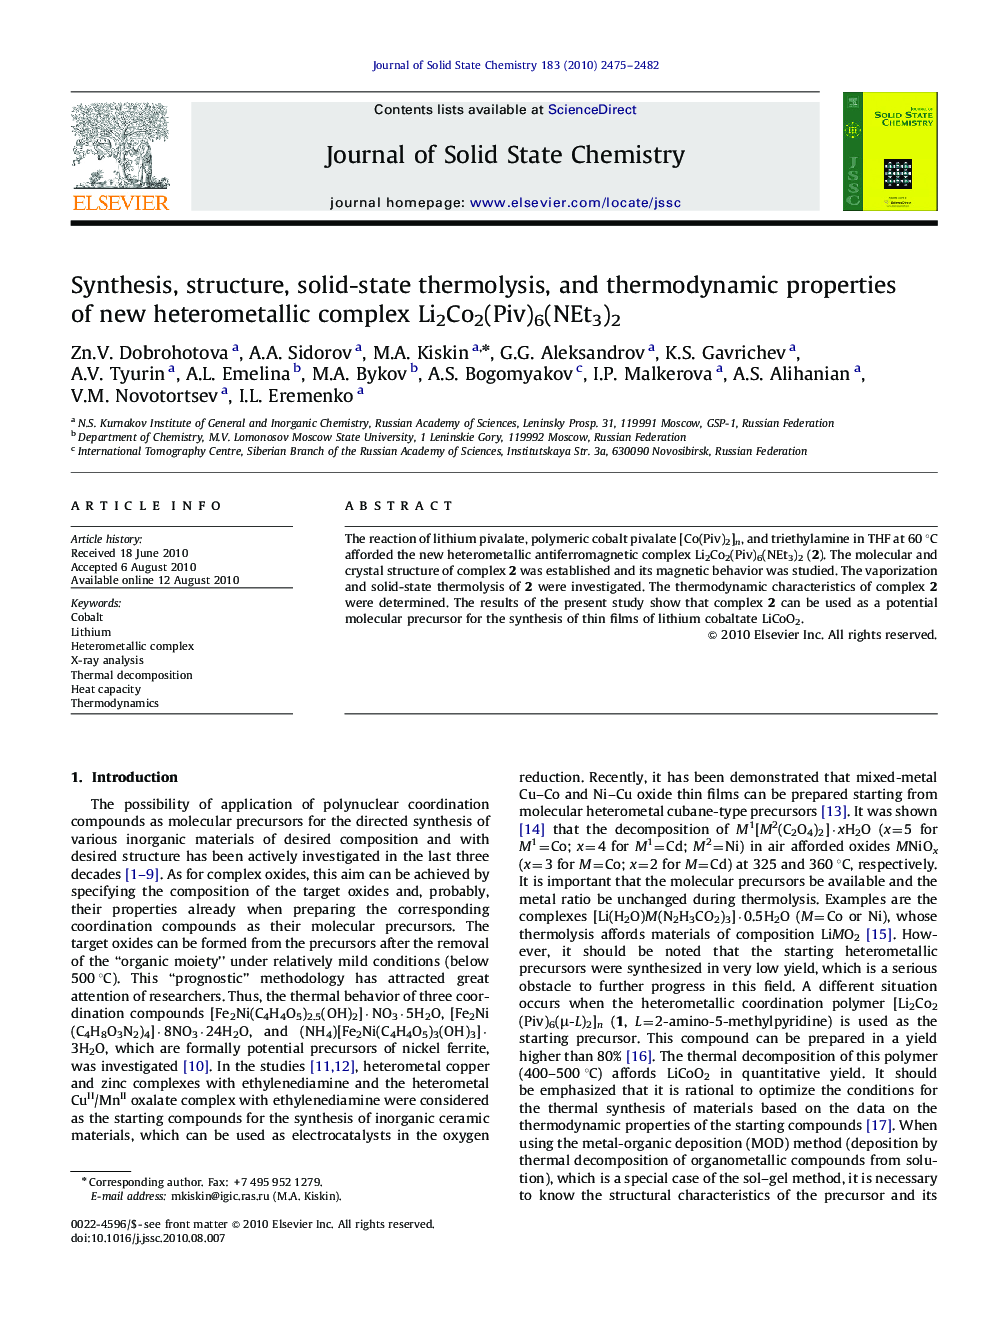 Synthesis, structure, solid-state thermolysis, and thermodynamic properties of new heterometallic complex Li2Co2(Piv)6(NEt3)2